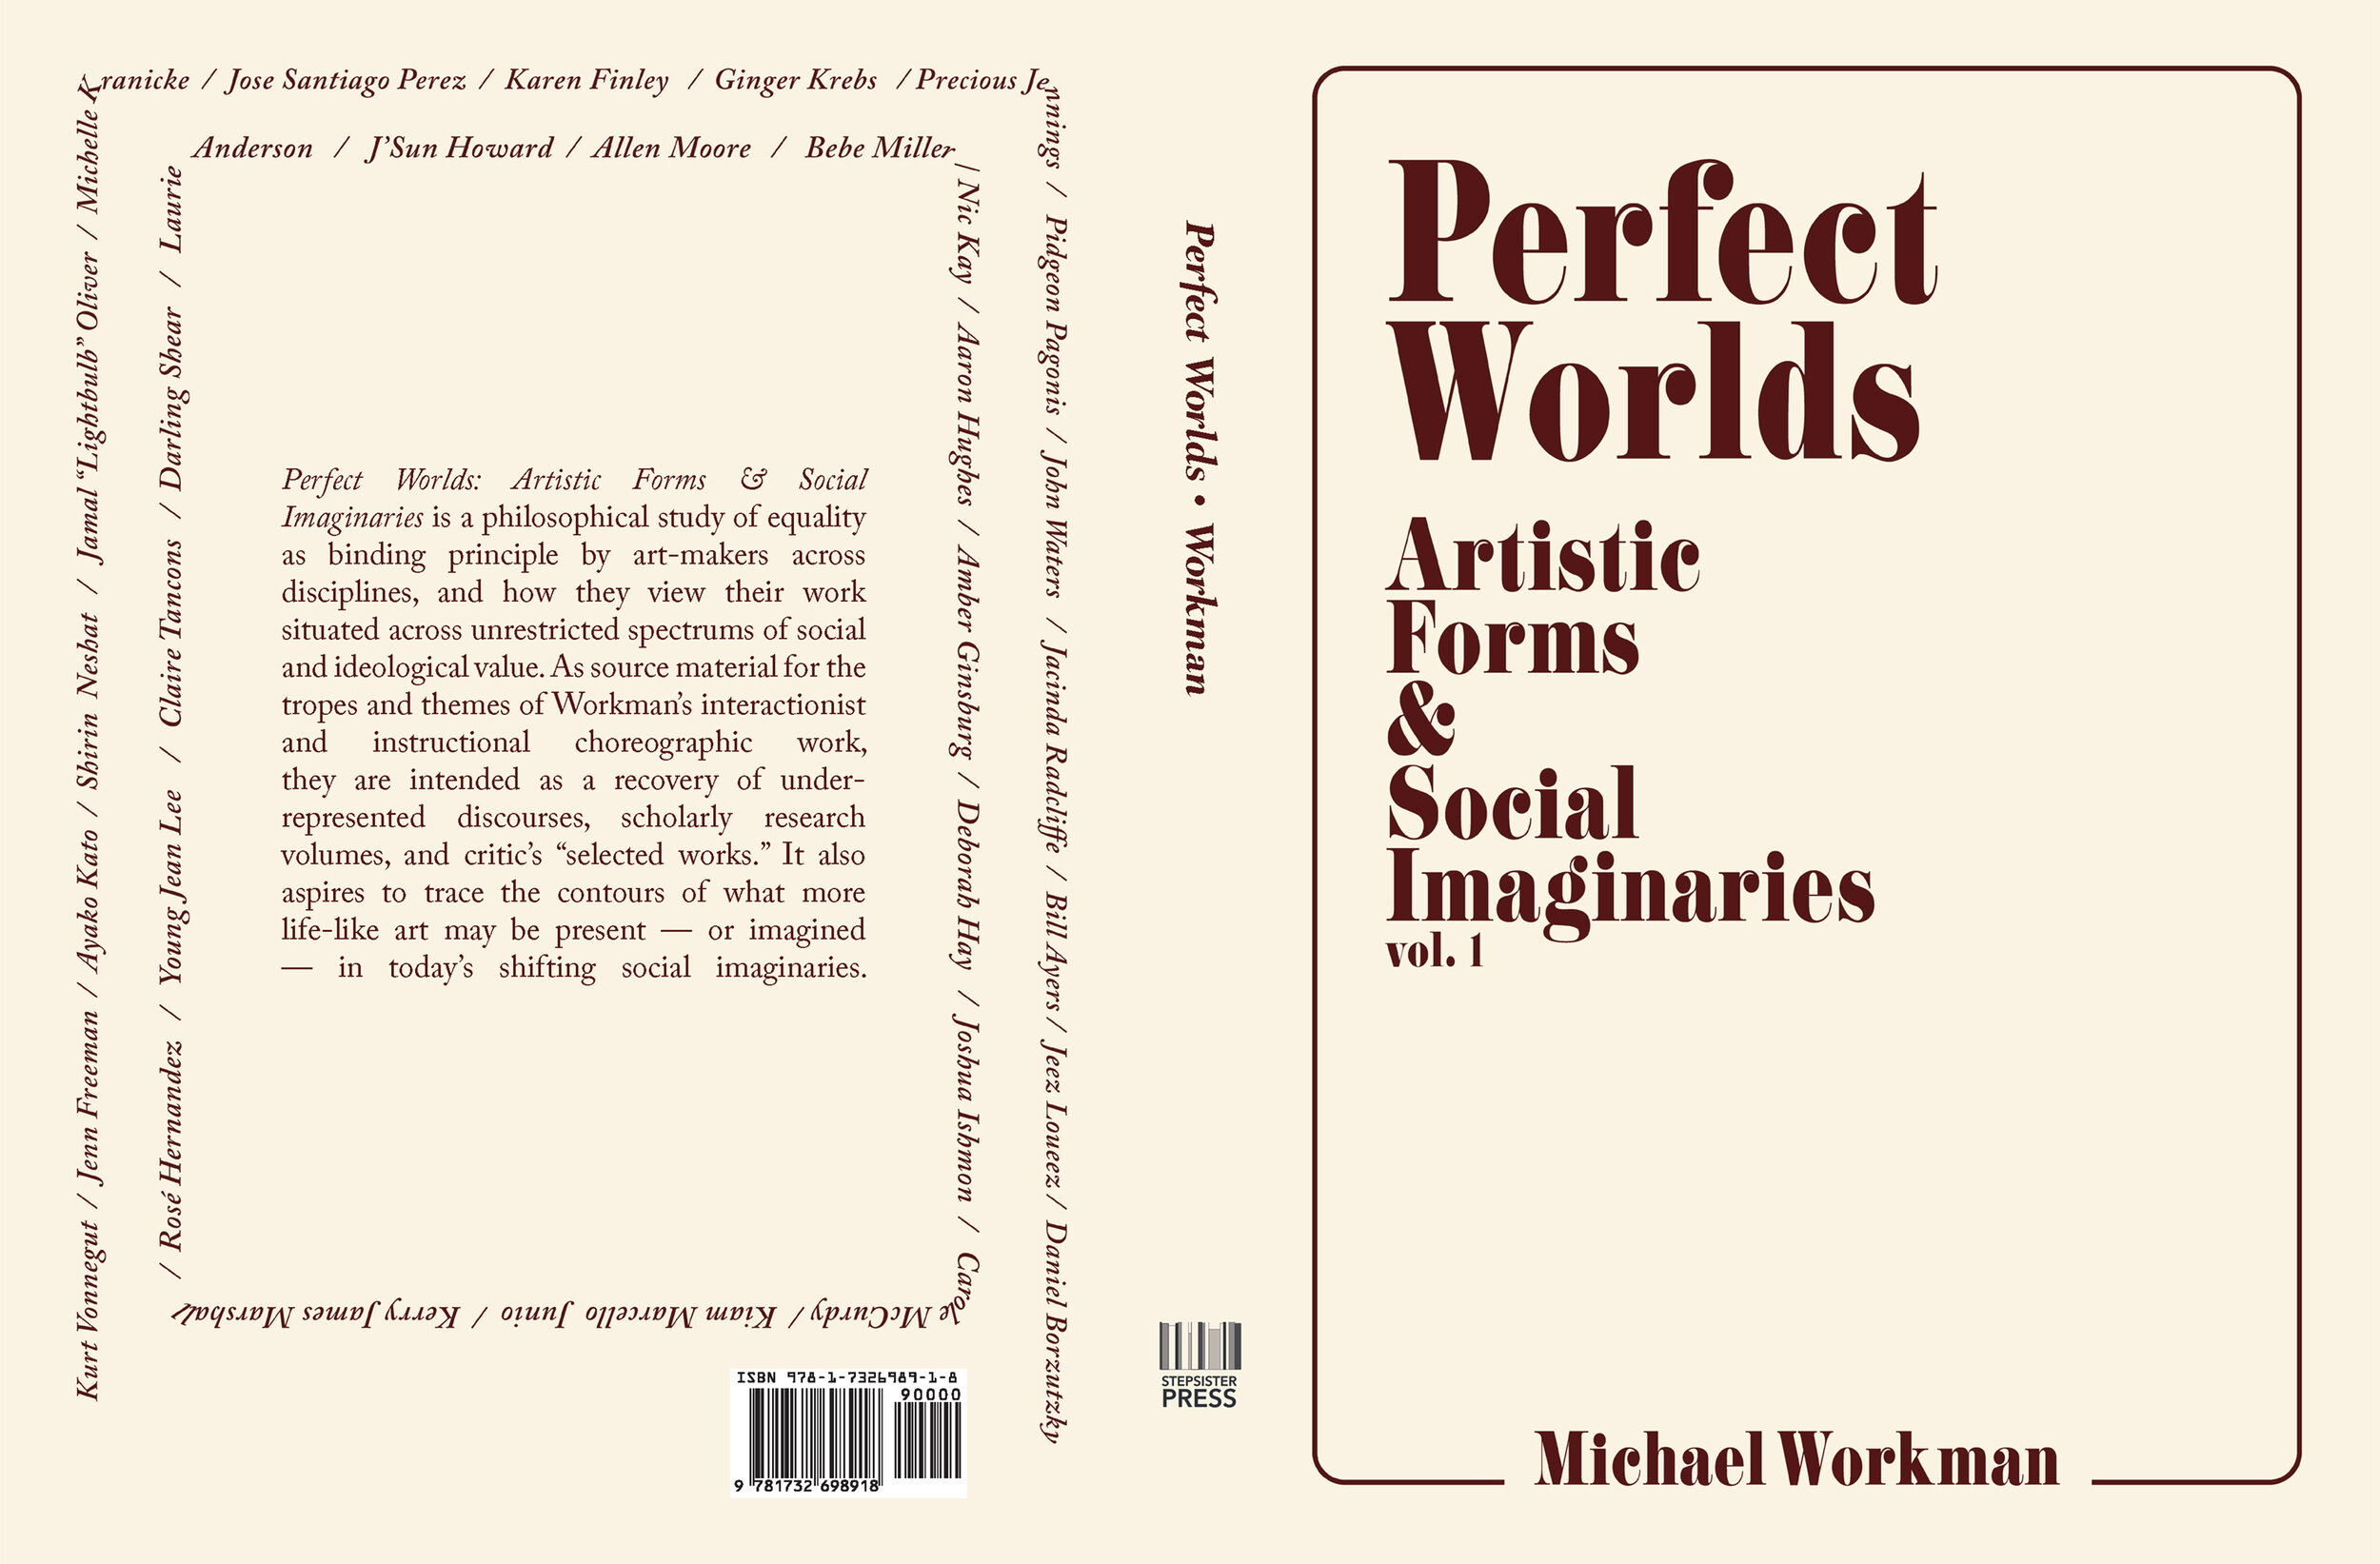  full cover design.  Perfect Worlds vol. 1 by Michael Workman. Published by StepSister Press.  